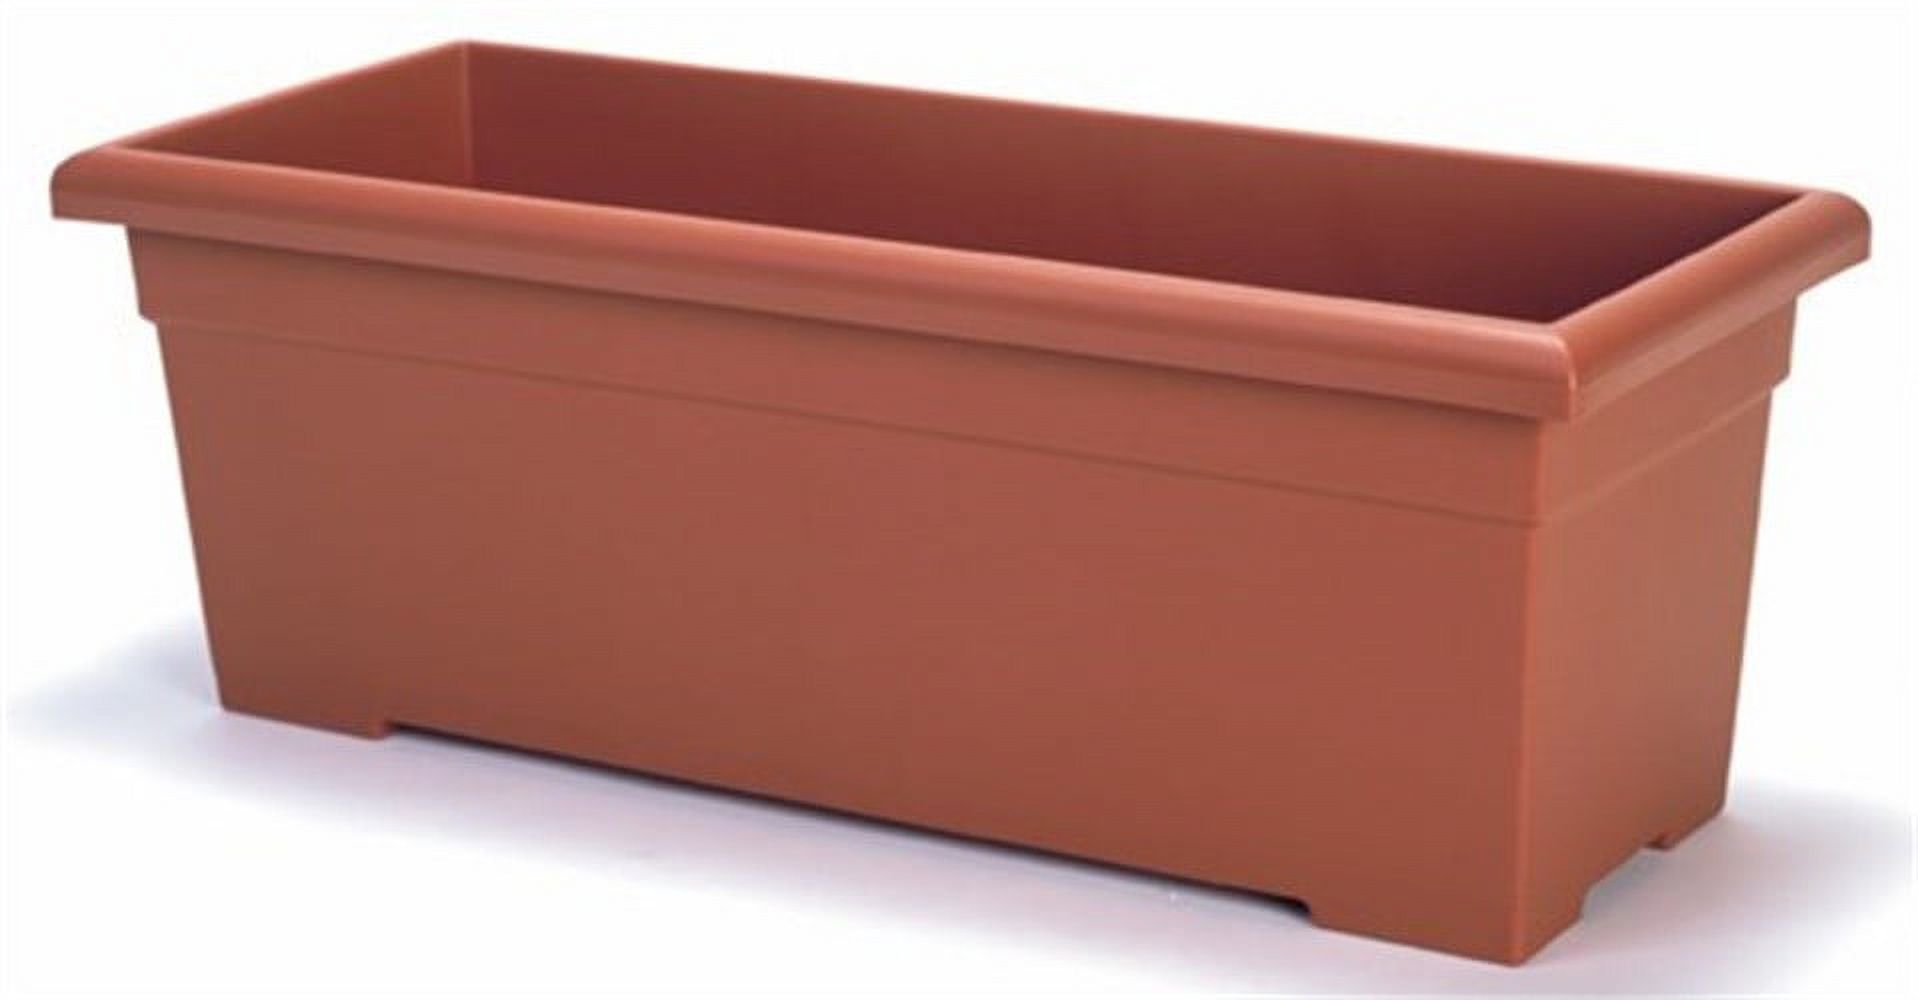 Akro Mils ROP28000E35 28" Clay Romana Planters Pack of 5 - image 1 of 4